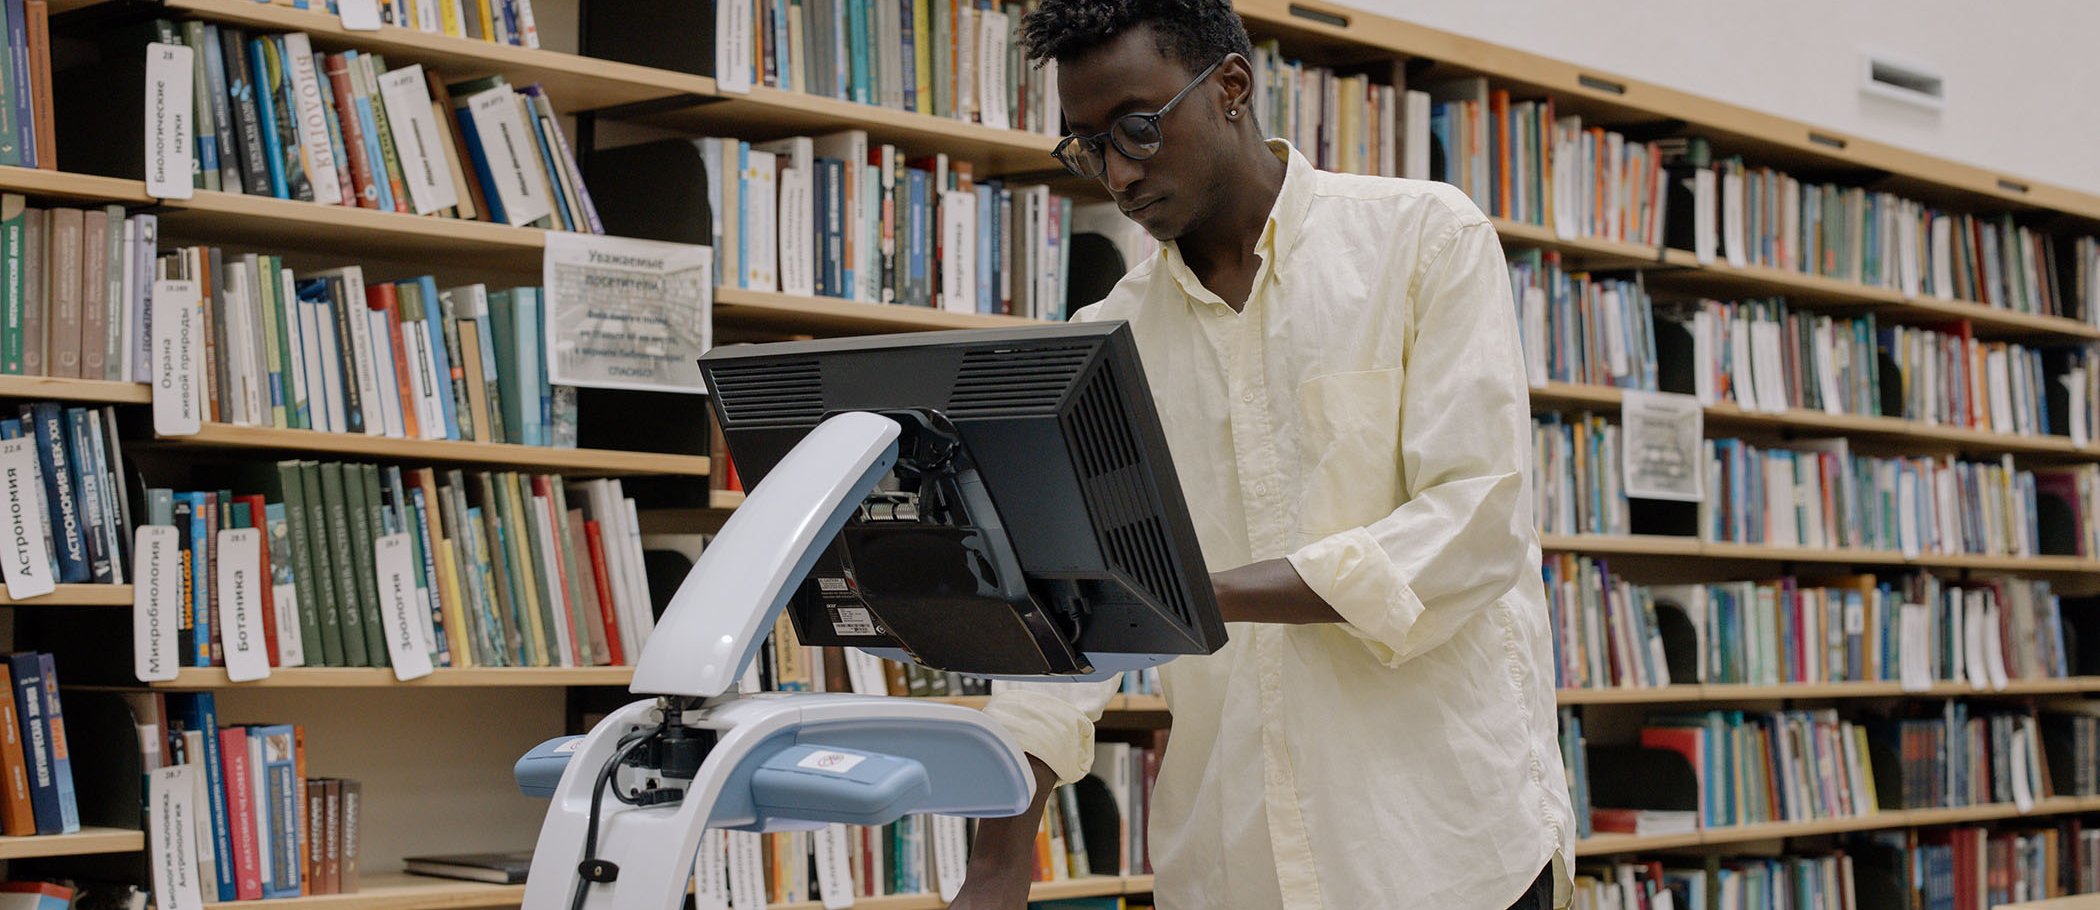 A person using a scanner in a library